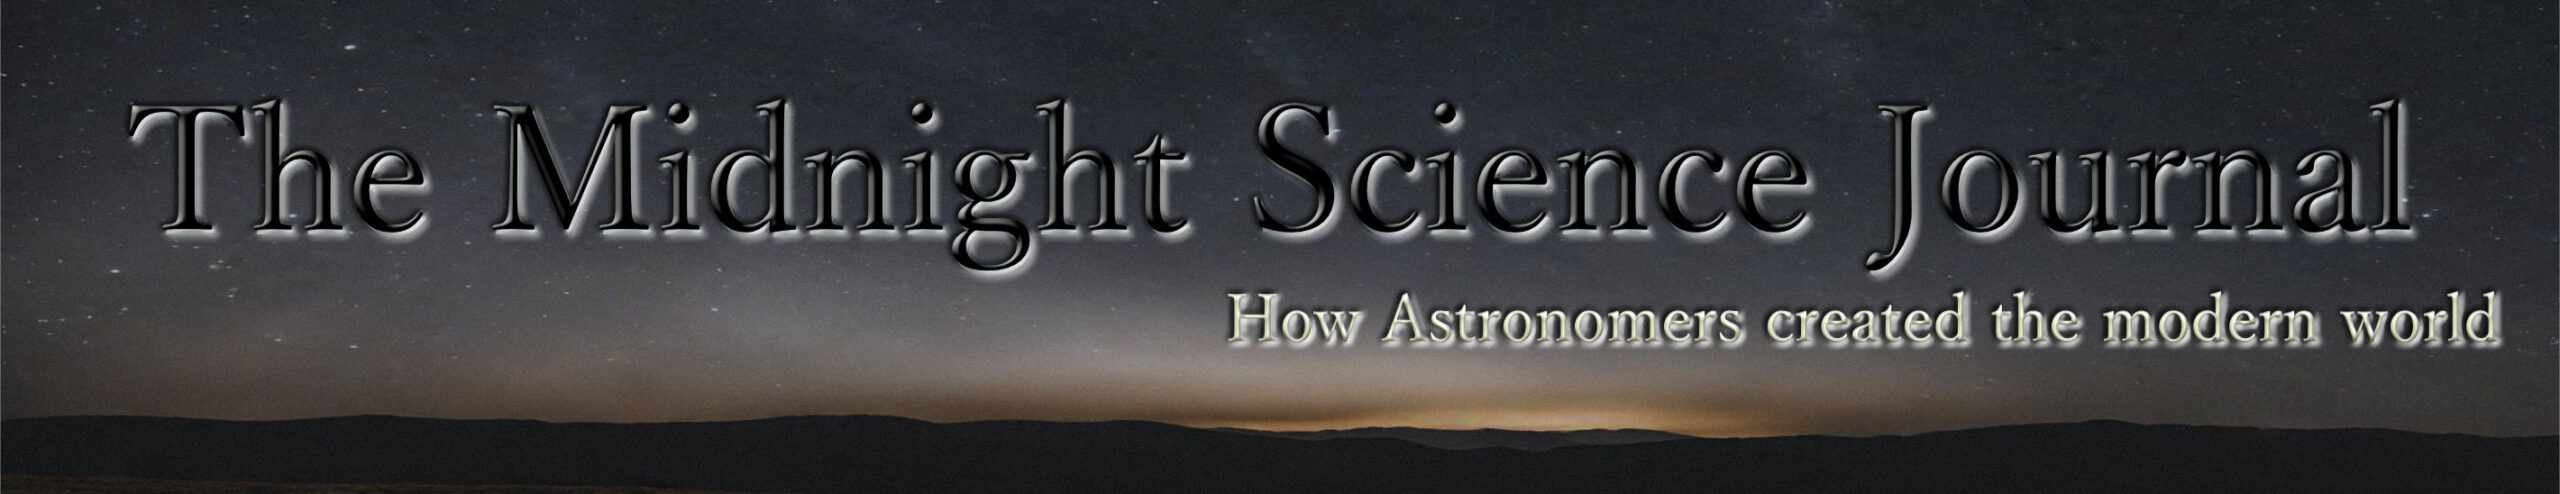 Midnight Science Journal When Astronomers Created the Modern World